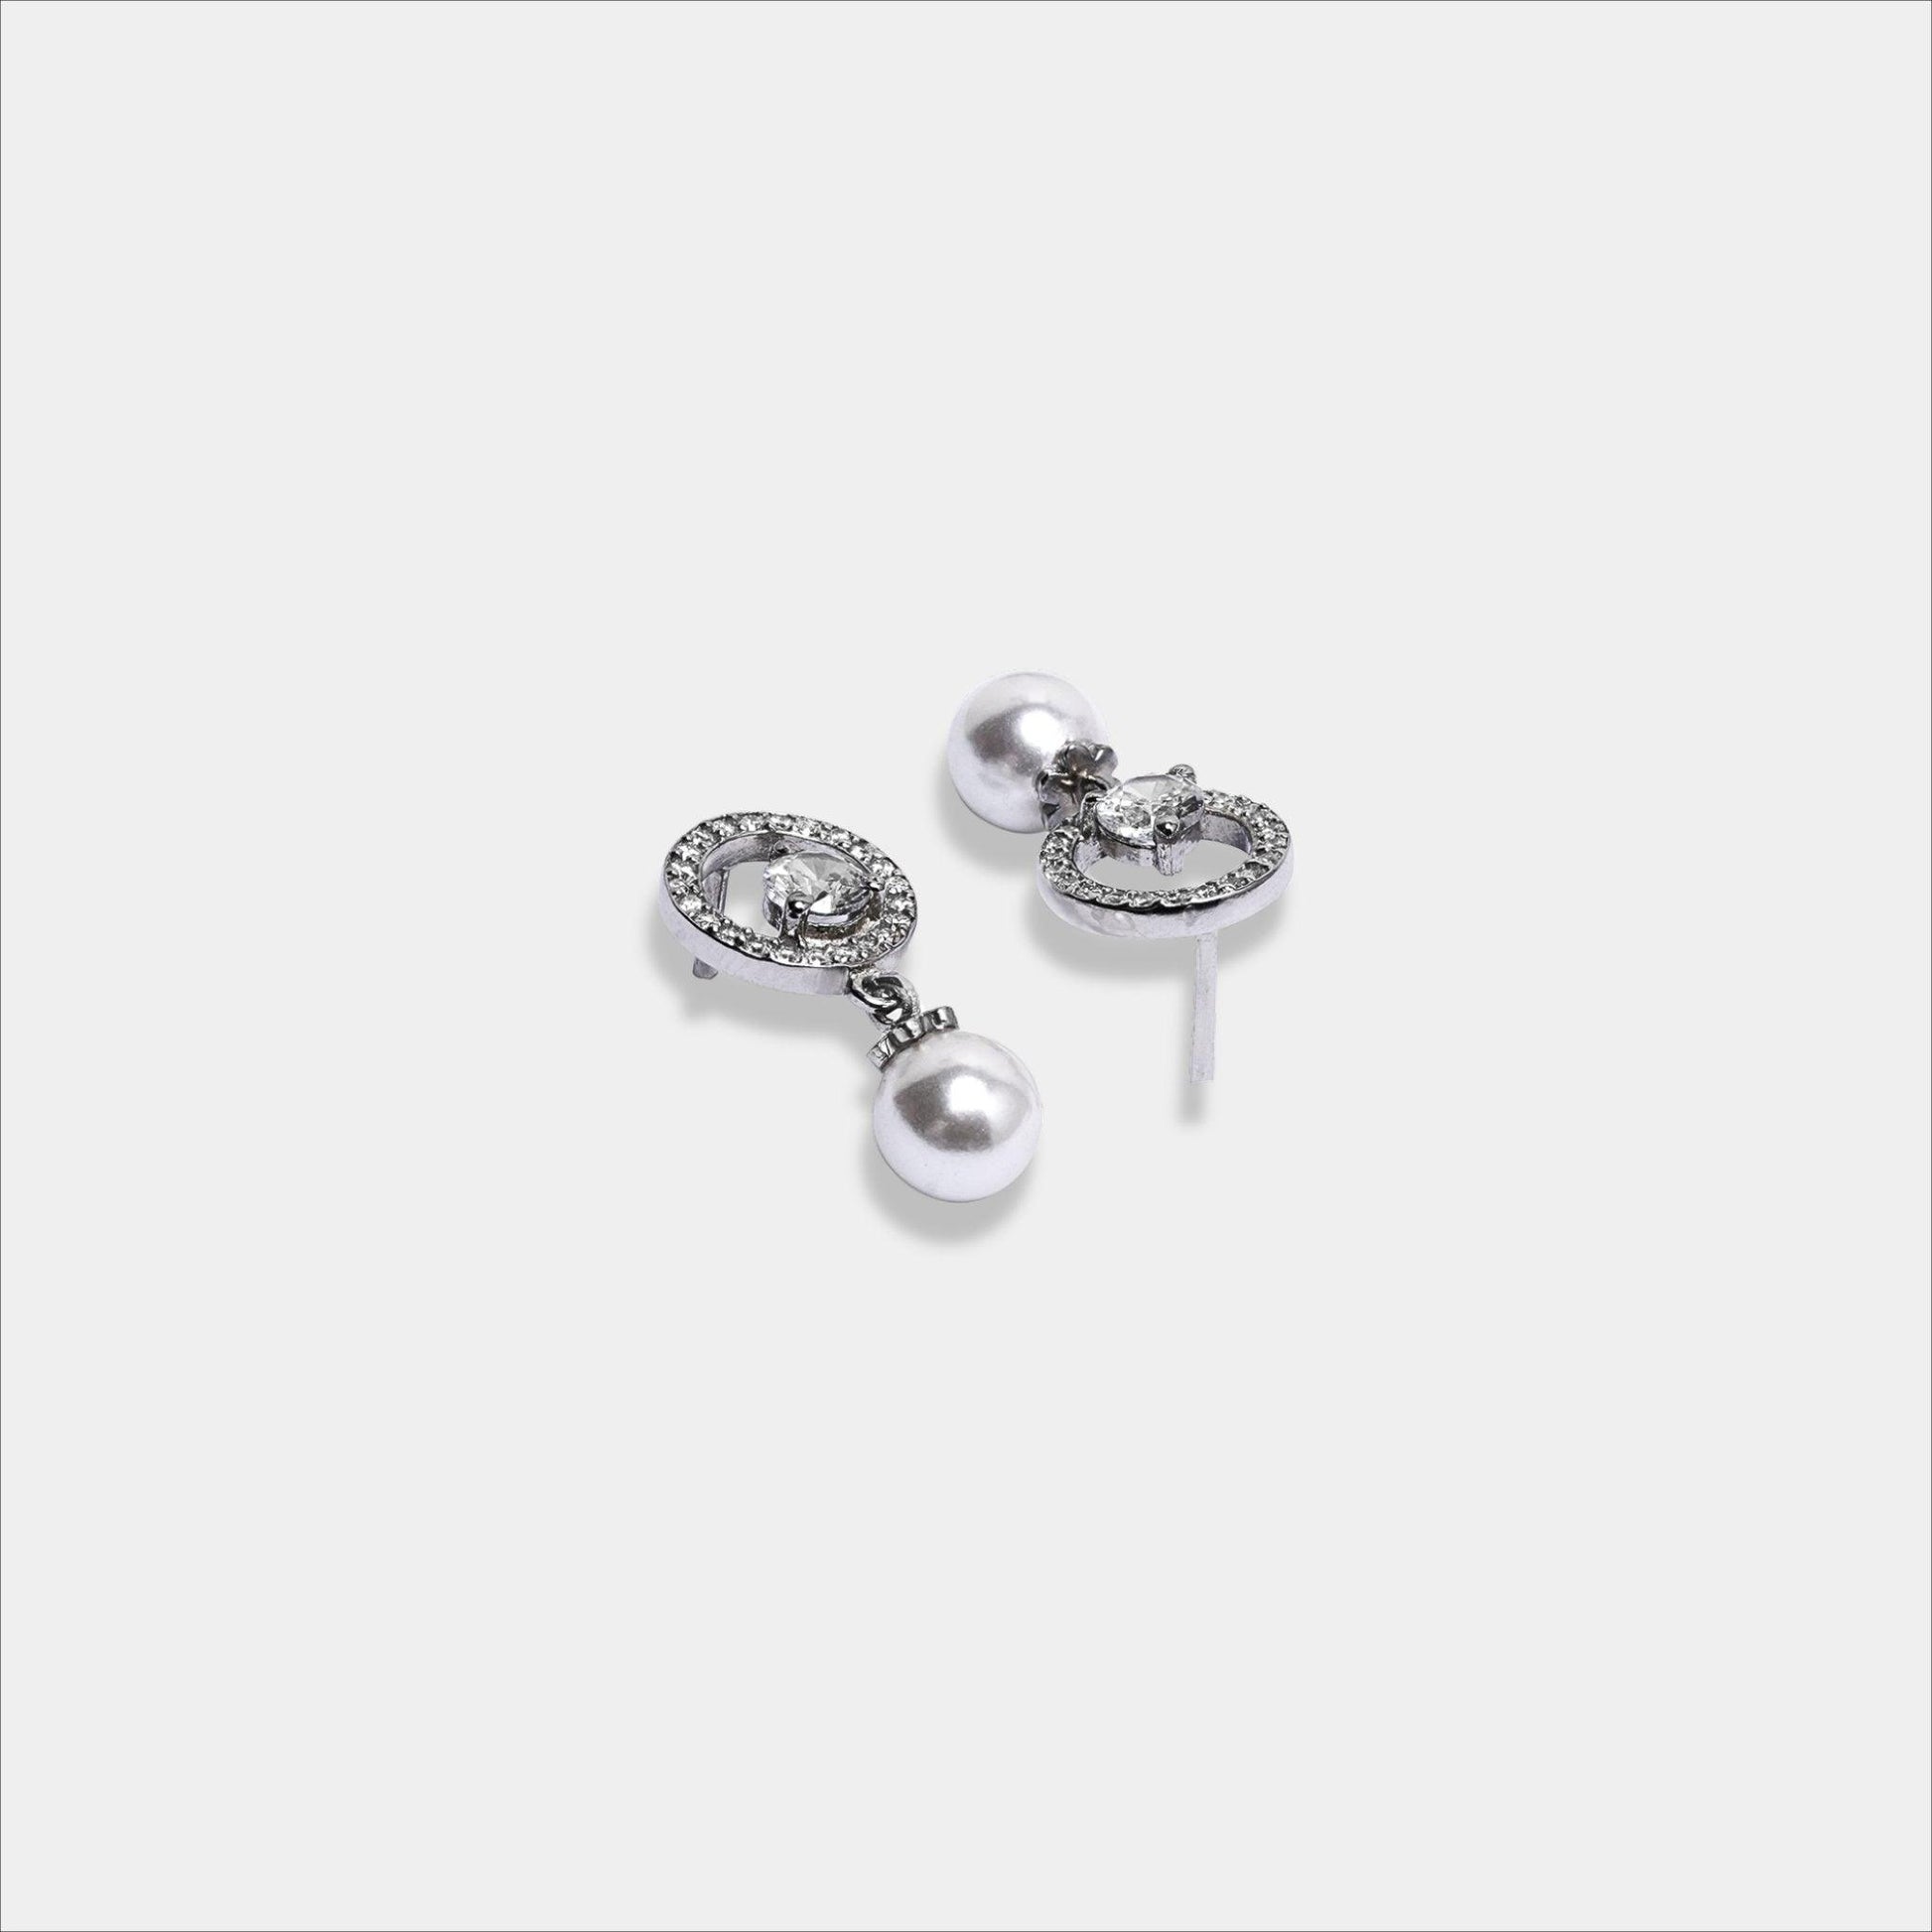  pair of dainty silver earrings featuring lustrous pearls.